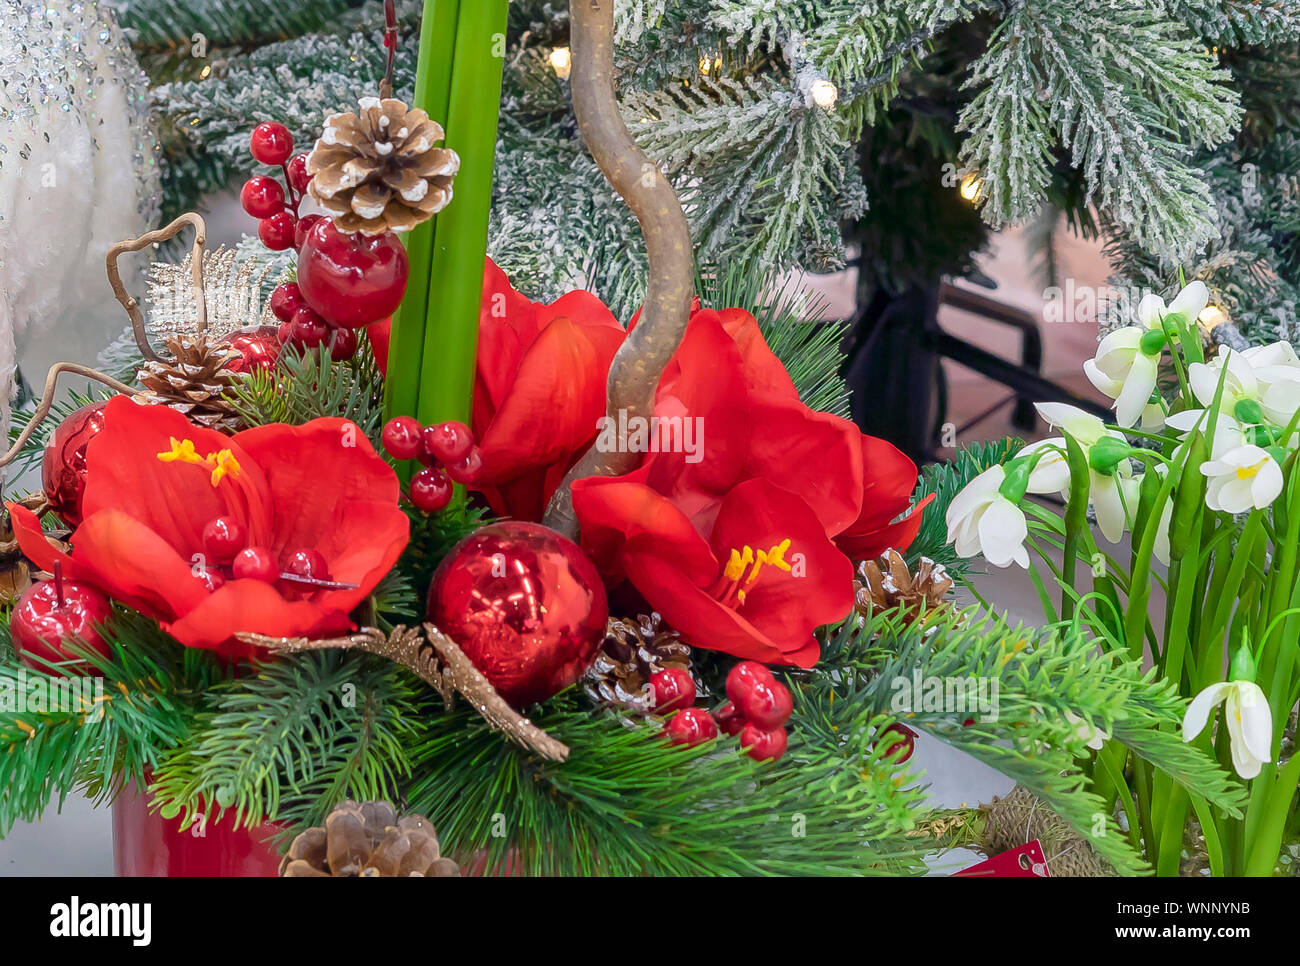 Christmas composition with flowers, berries and decorations. Stock Photo